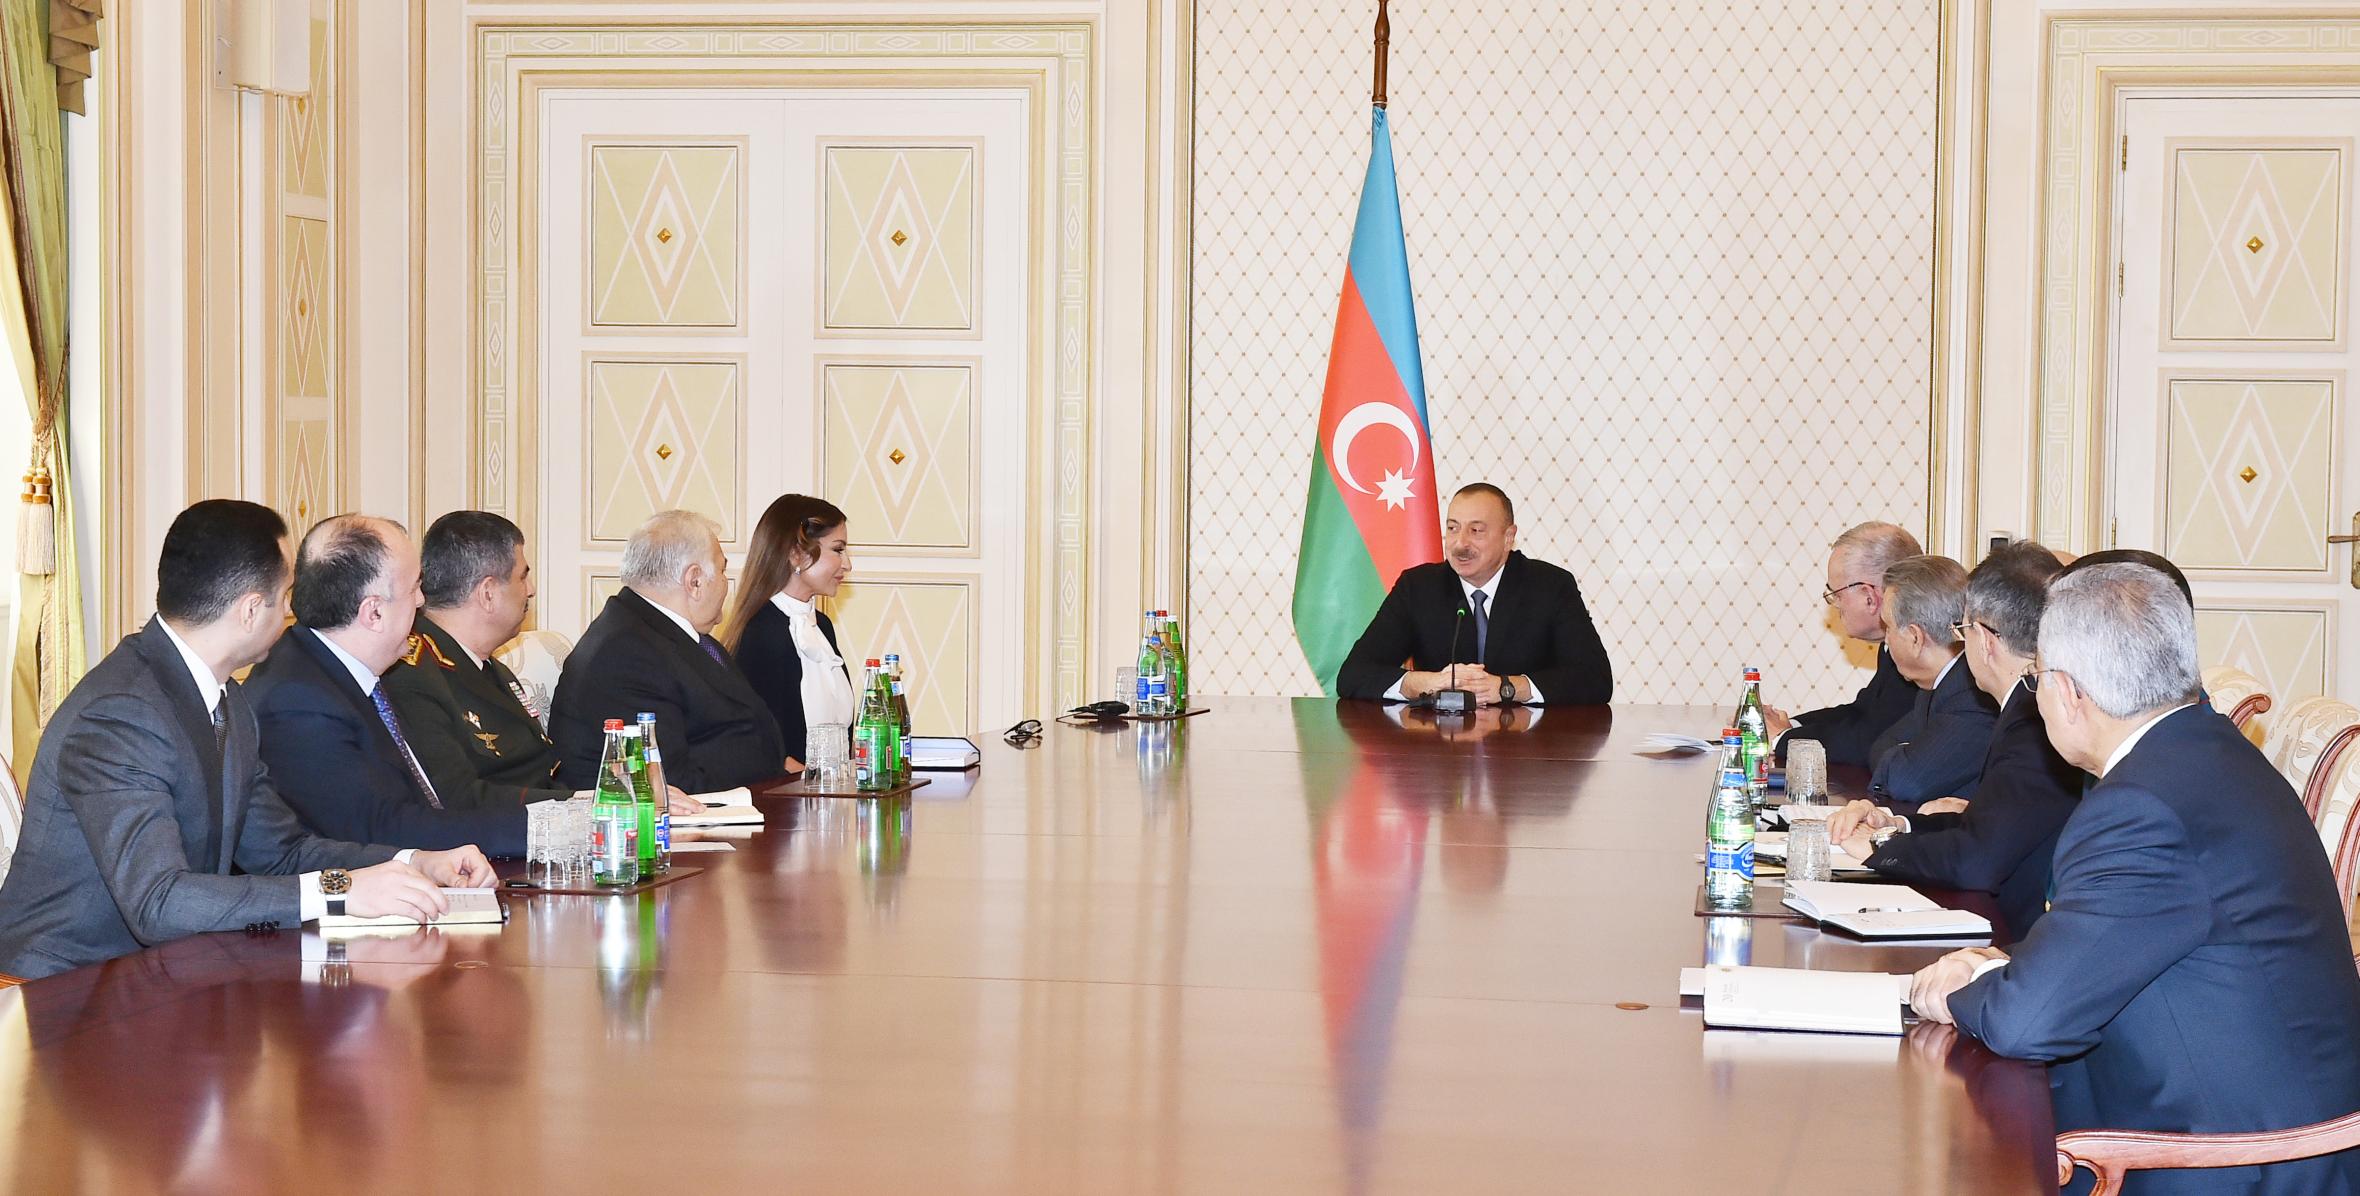 Meeting of Security Council under chairmanship of Ilham Aliyev was held